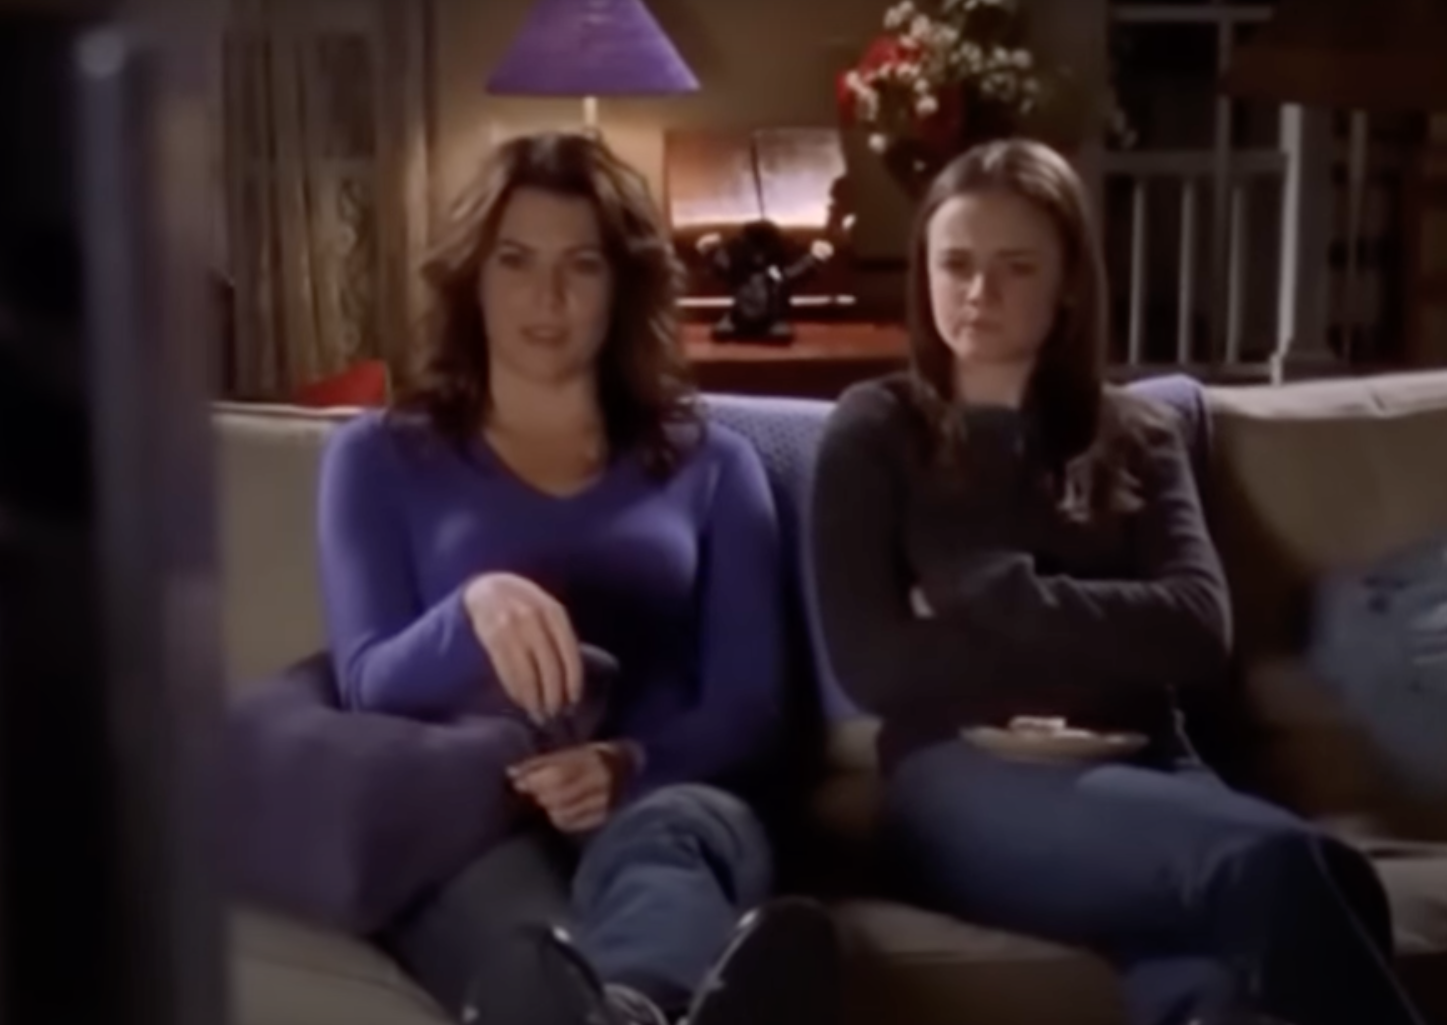 Lorelai and Rory from Gilmore Girls sit on couch, Lorelai in a casual top, Rory in a sweater